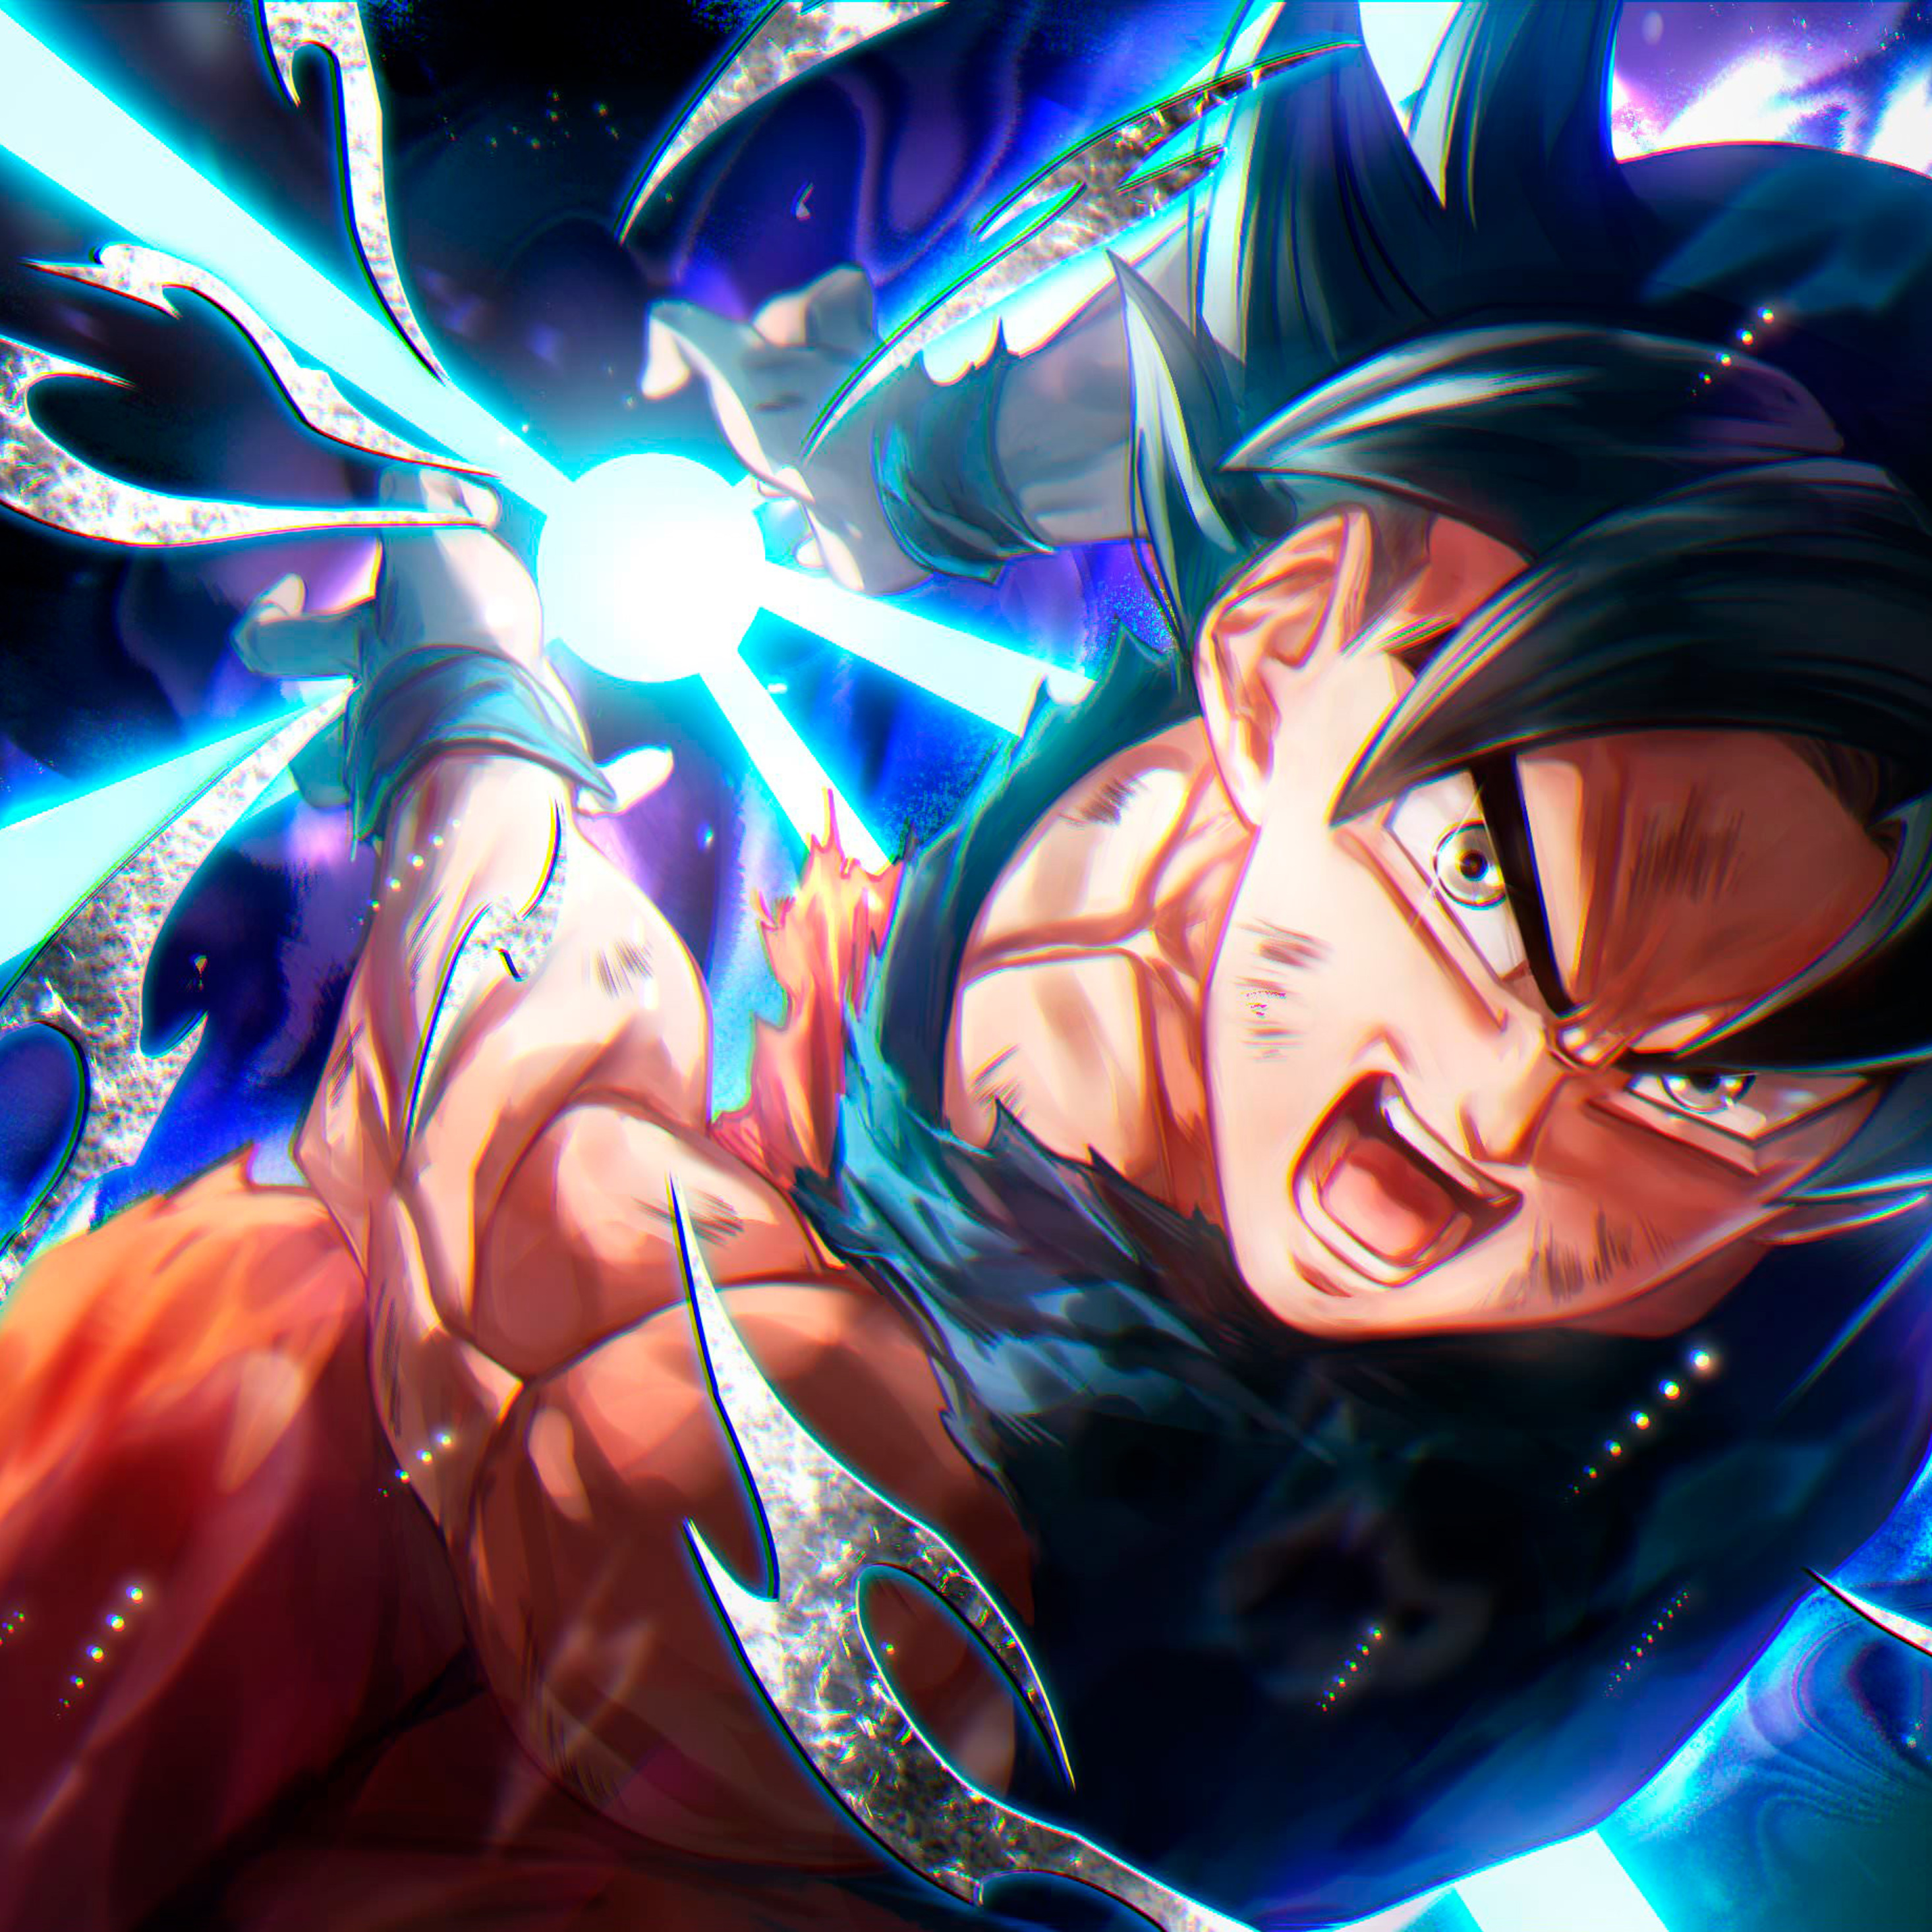 X goku in dragon ball super anime k ipad pro retina display hd k wallpapers images backgrounds photos and pictures